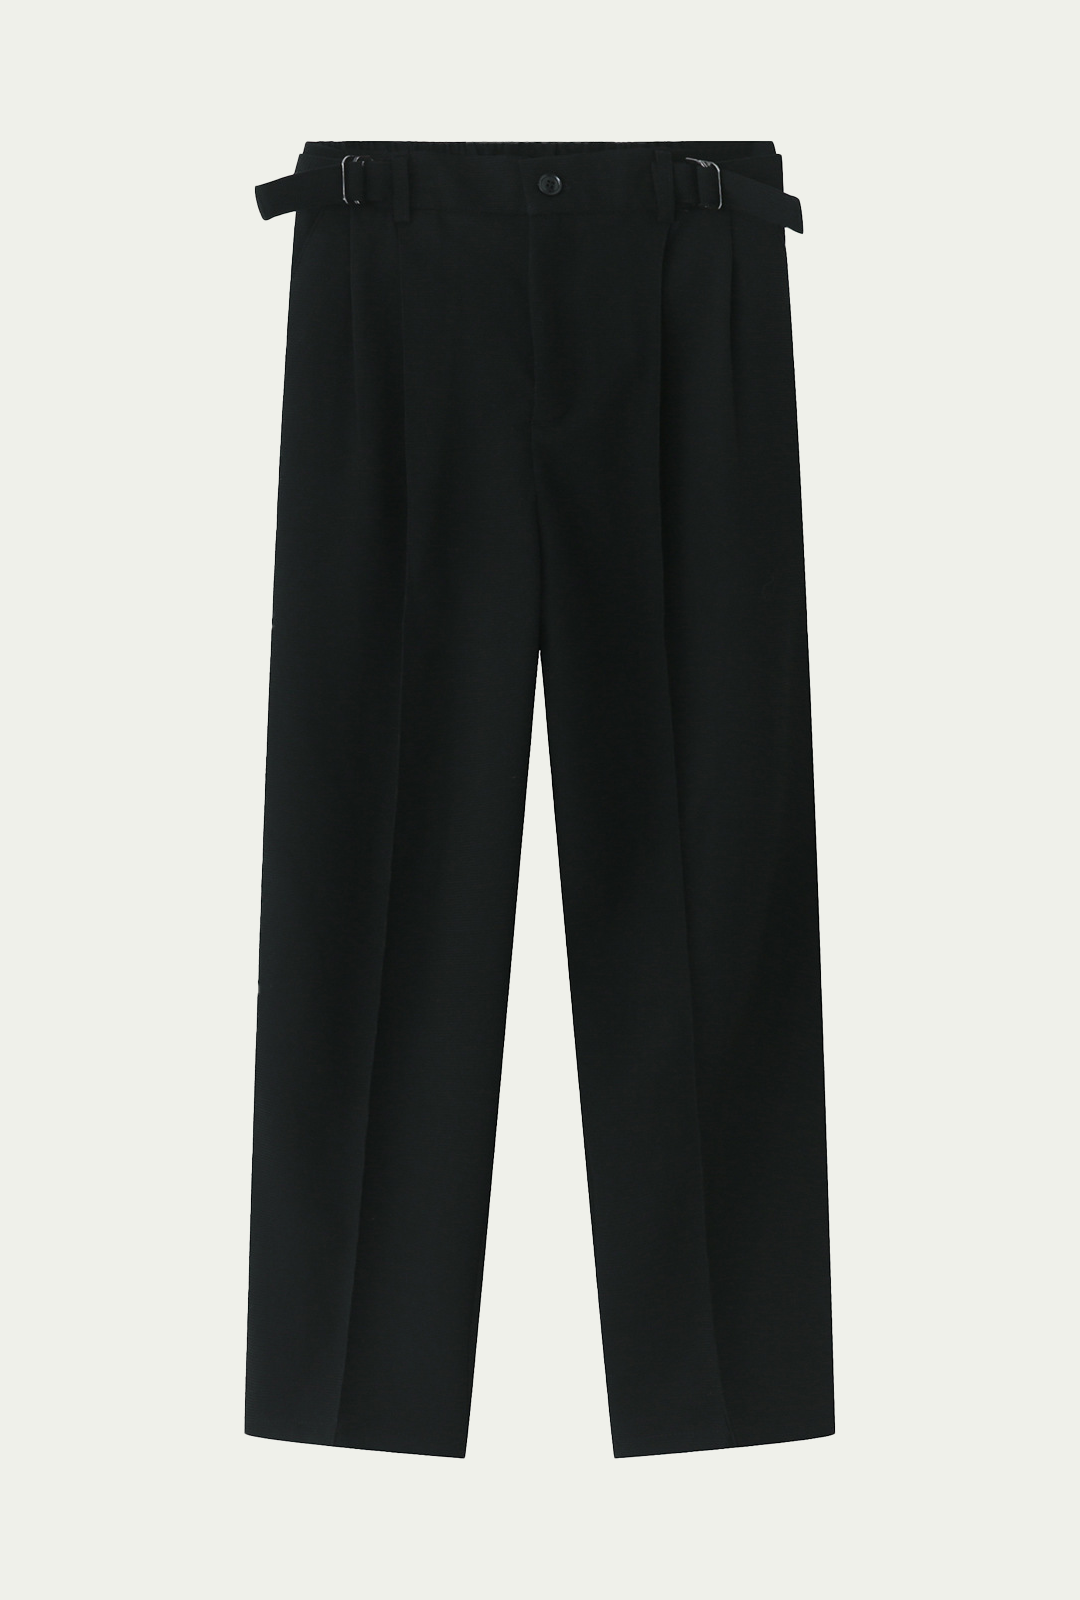 David Pleated Trousers